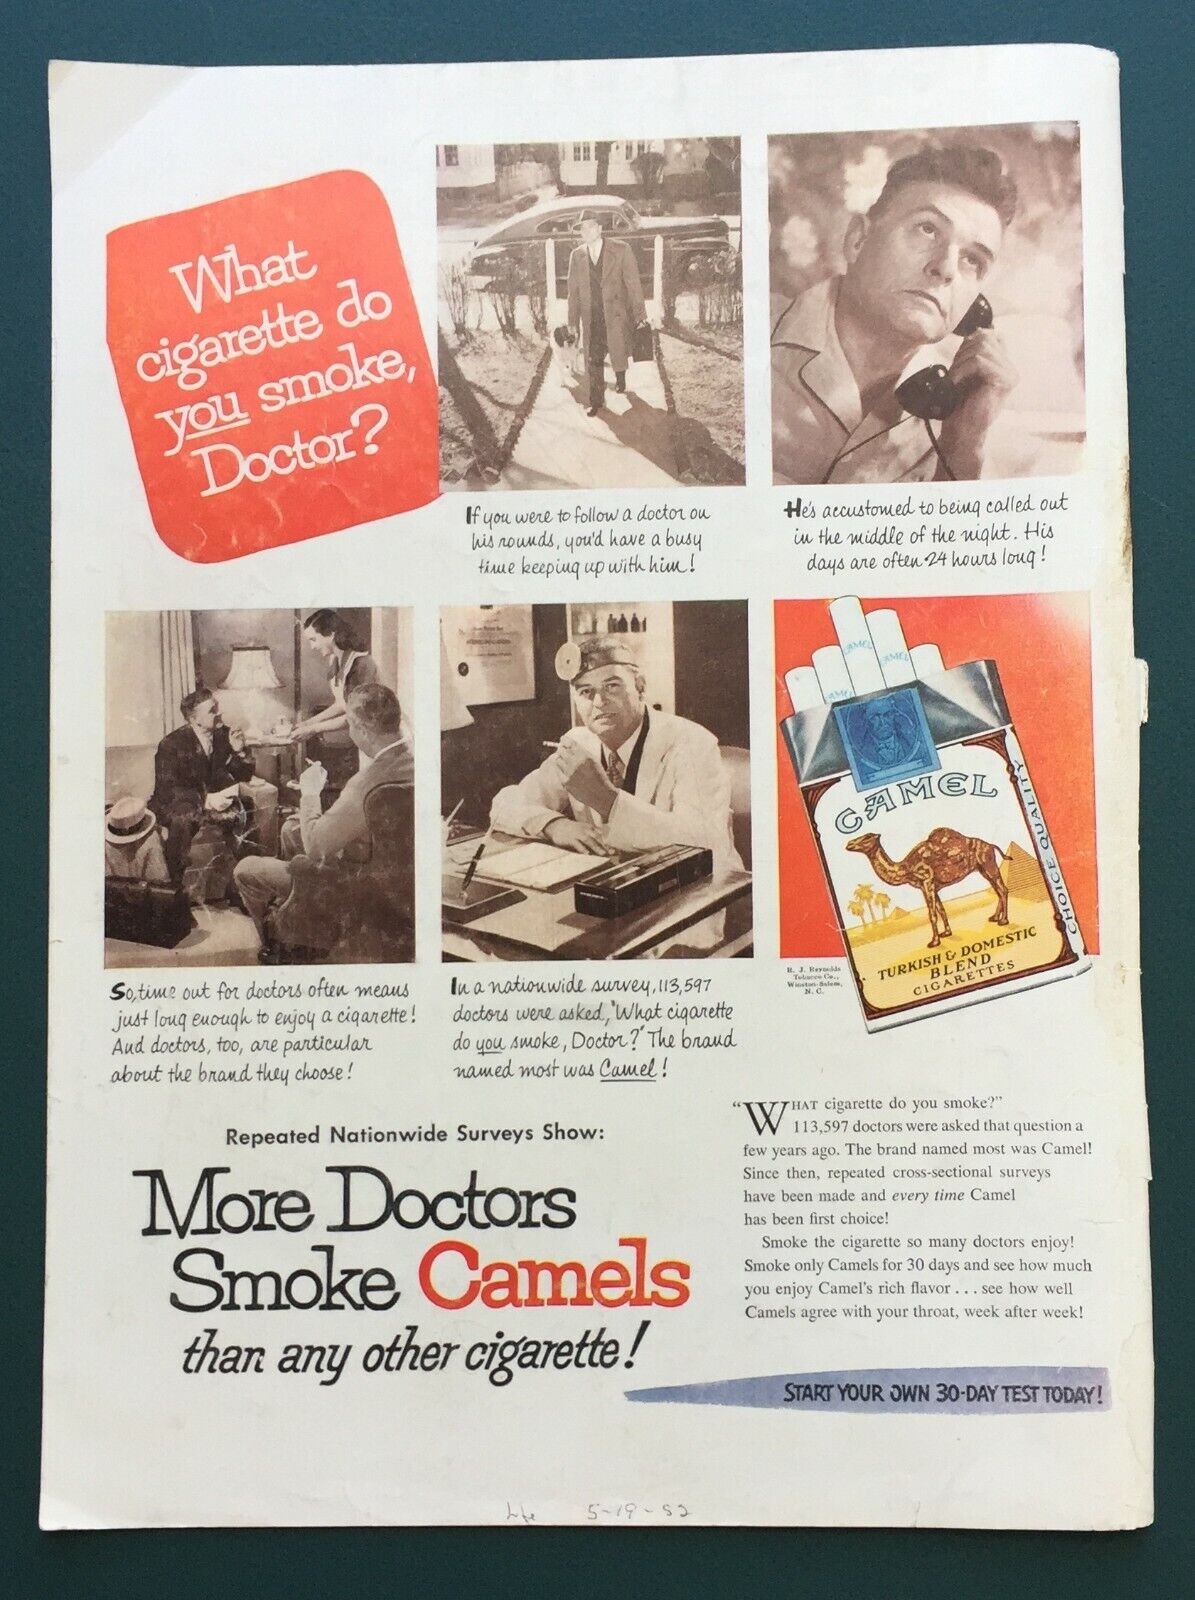 A vintage ad from Camel